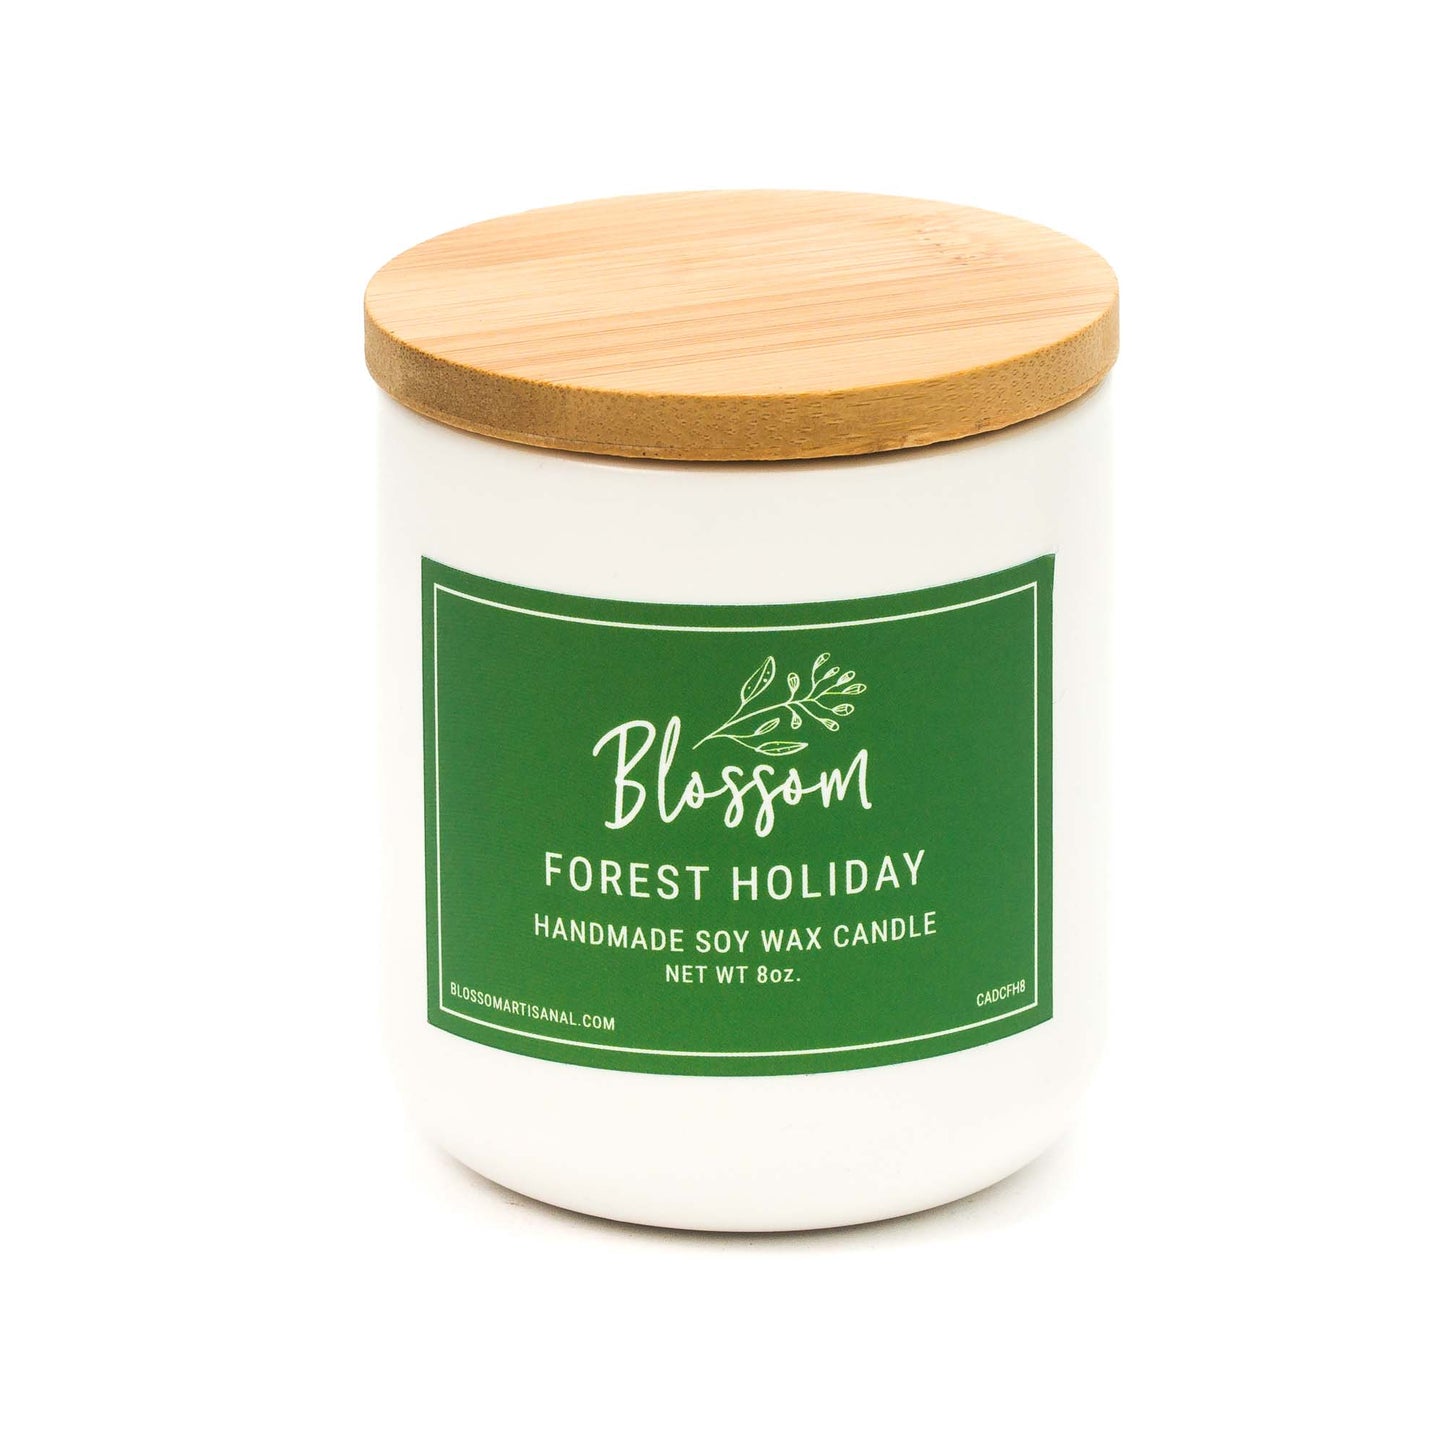 White Ceramic Decorative Soy Wax Candle Essential Oil Scent 8oz Forest Holiday